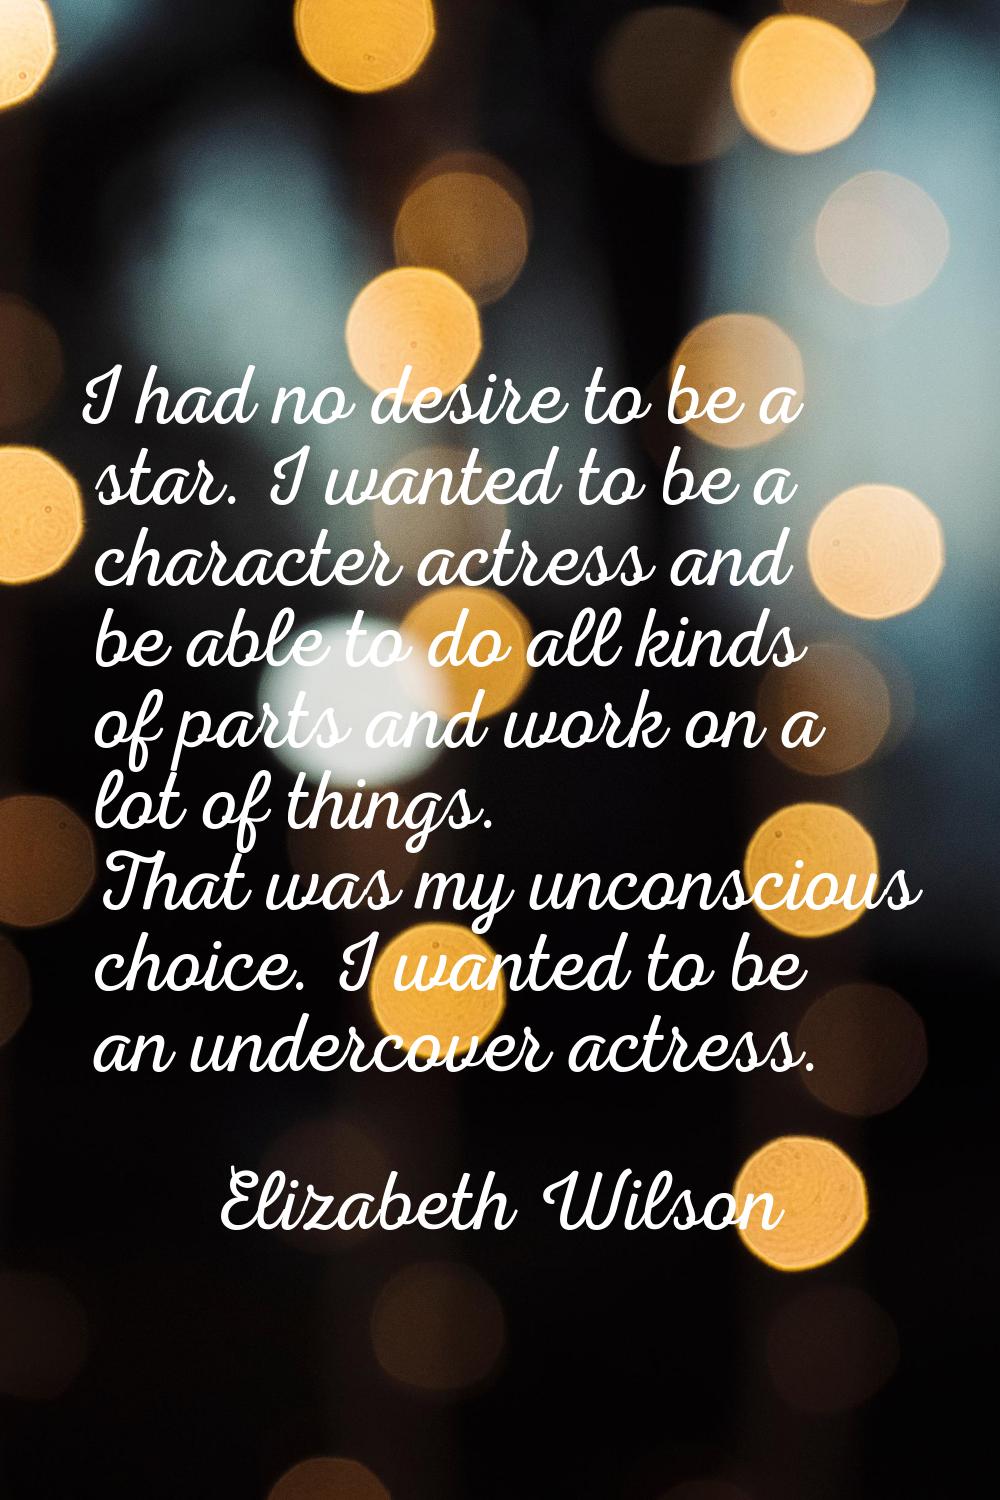 I had no desire to be a star. I wanted to be a character actress and be able to do all kinds of par